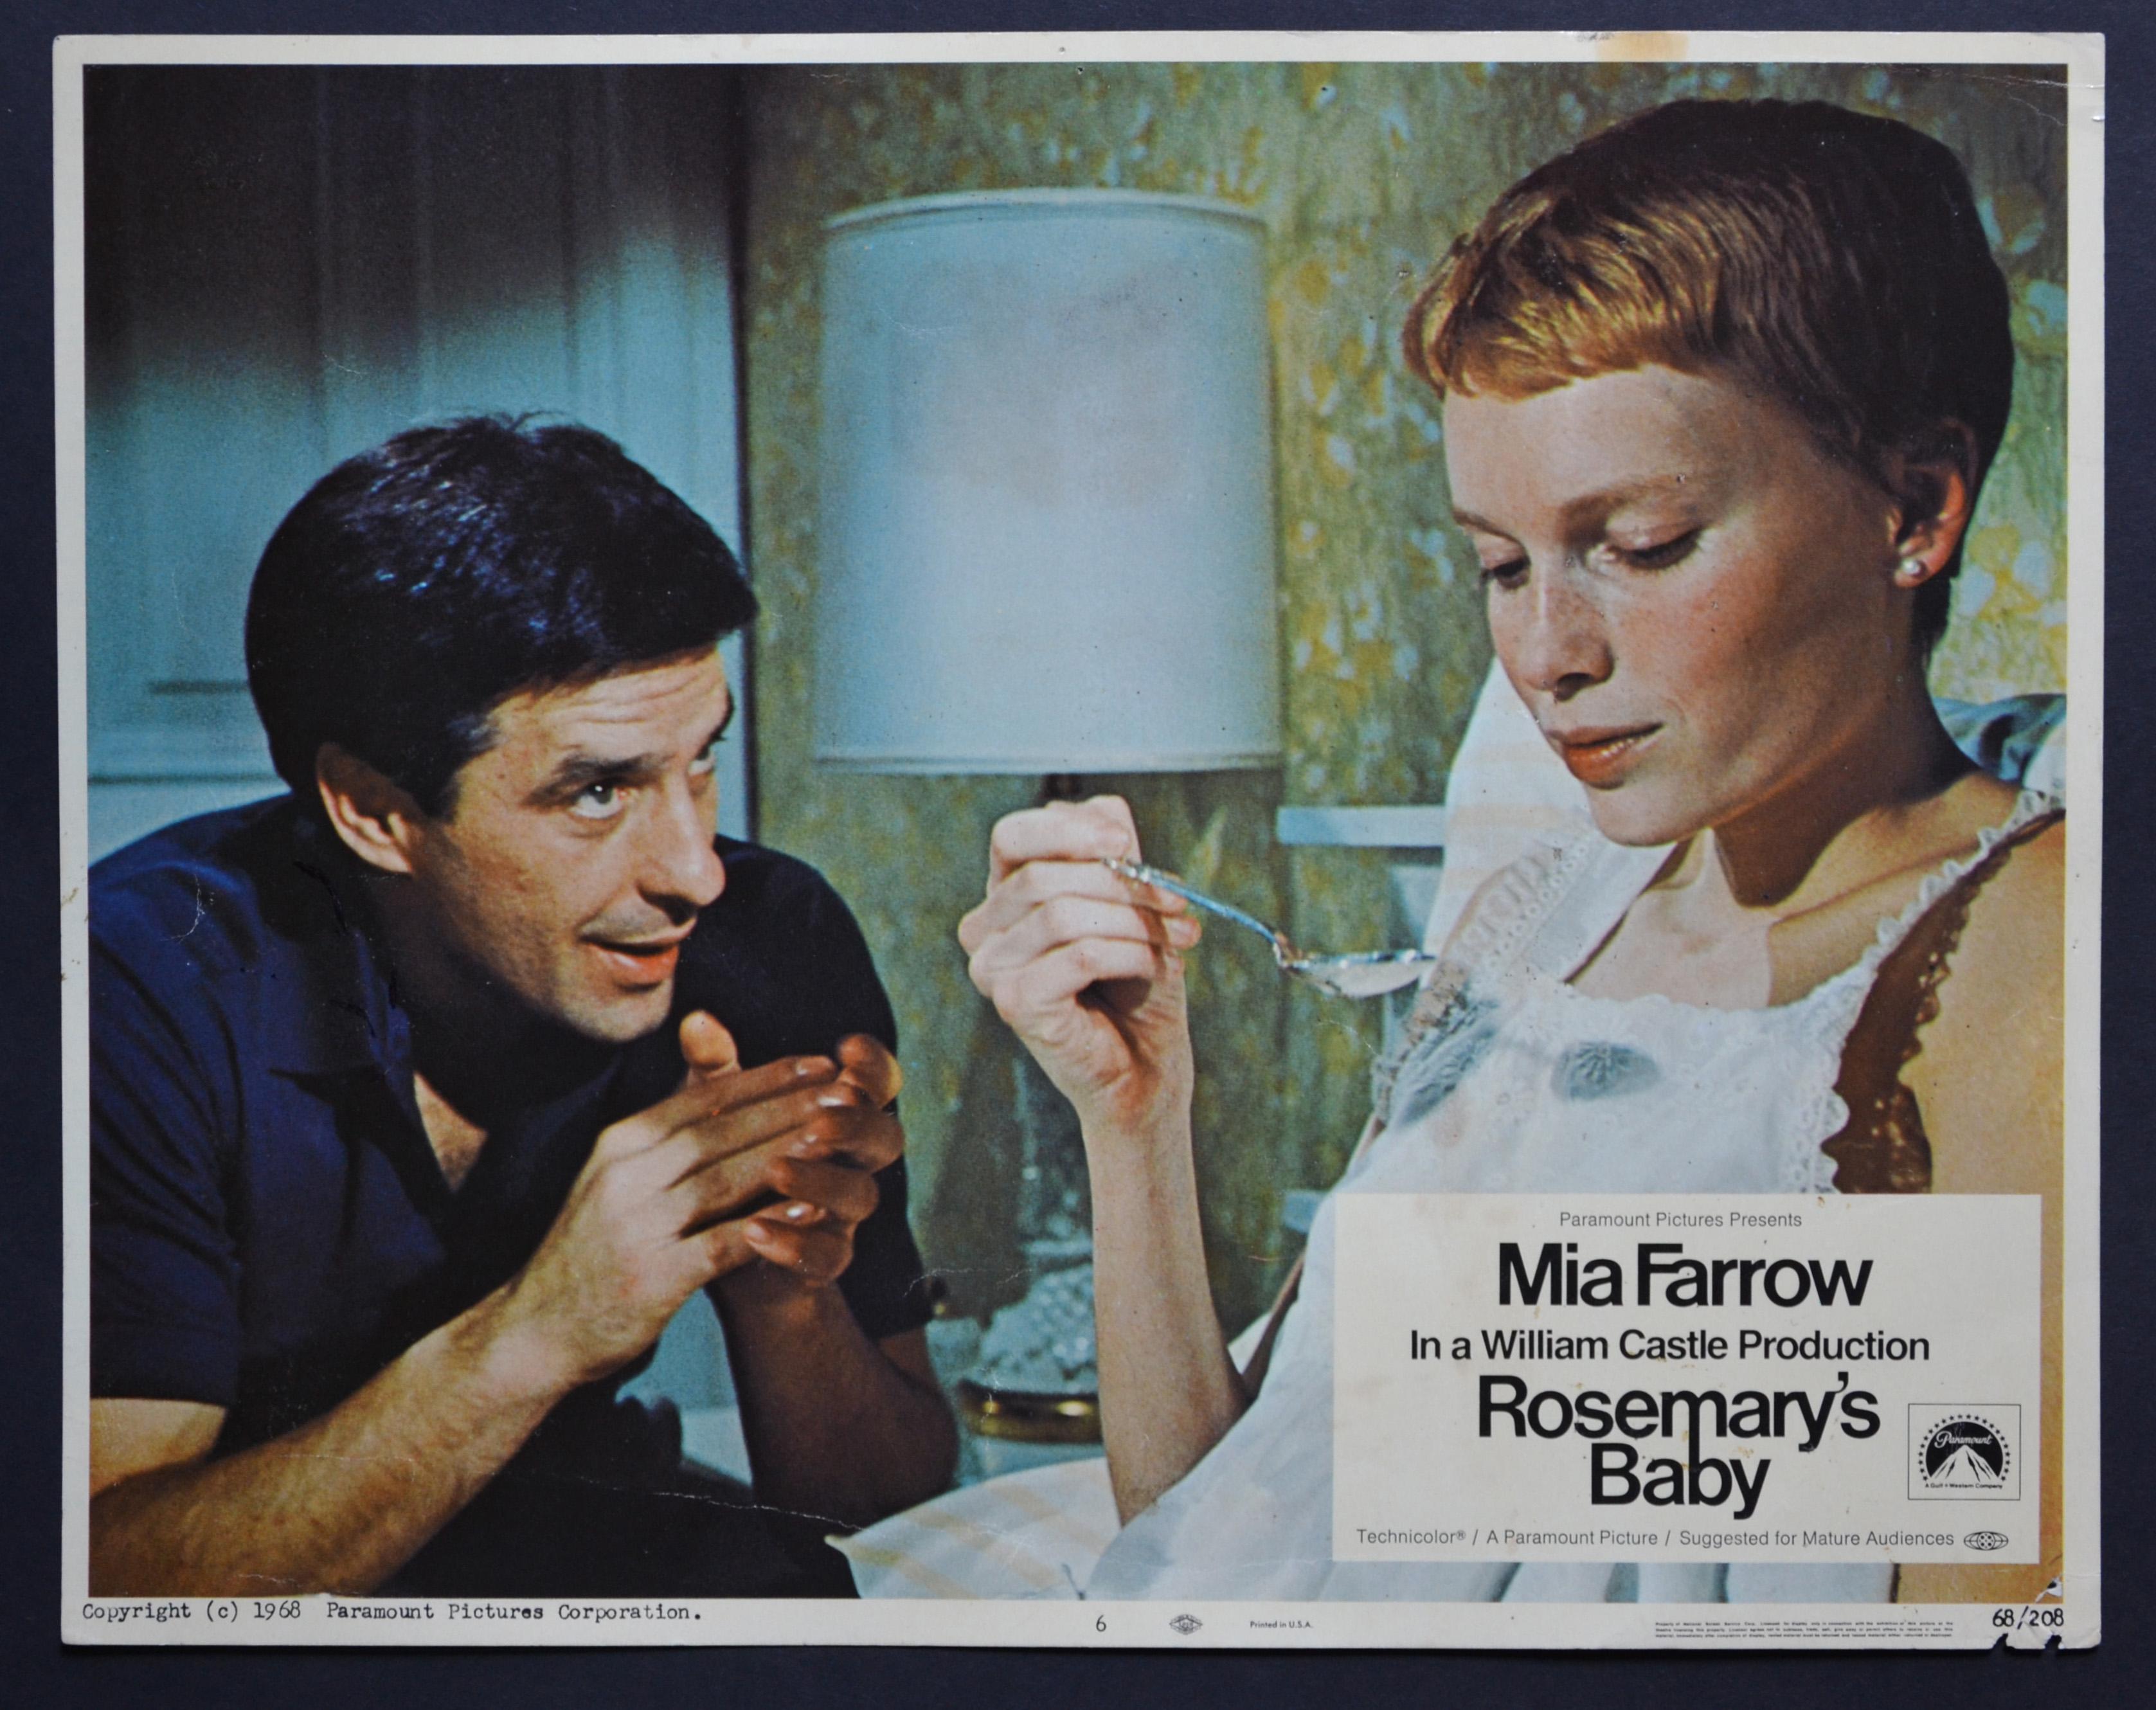 "Rosemary's Baby Vintage American Lobby Card of the Movie, USA 1968.